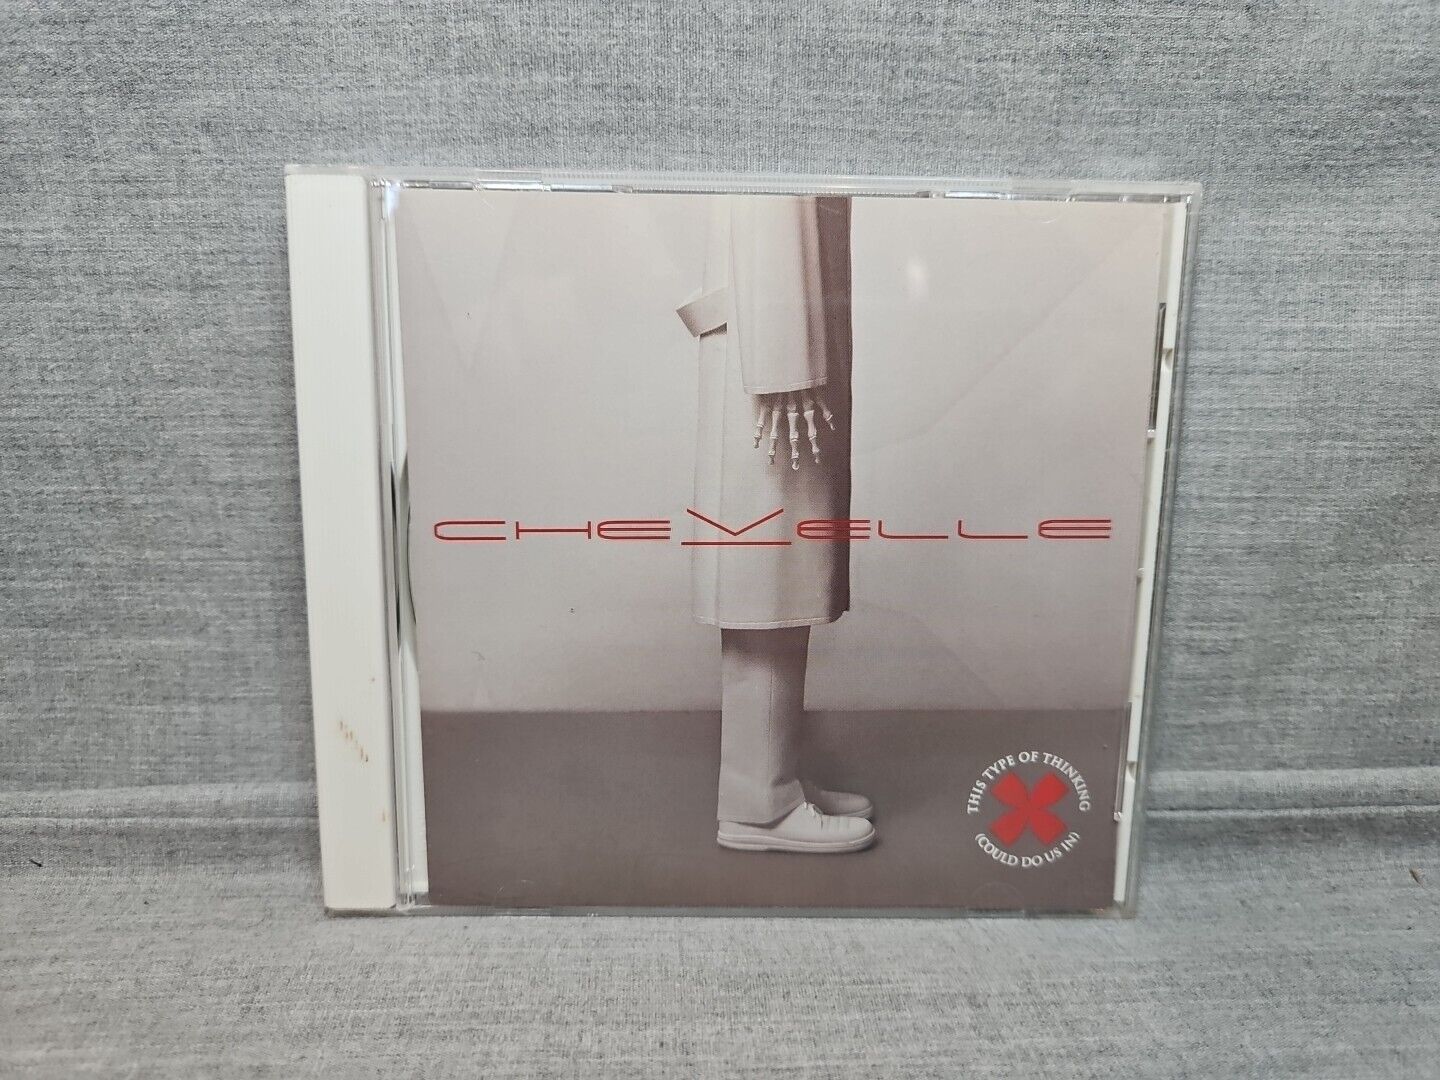 This Type Of Thinking (Could Do Us In) by Chevelle (CD, 2017)